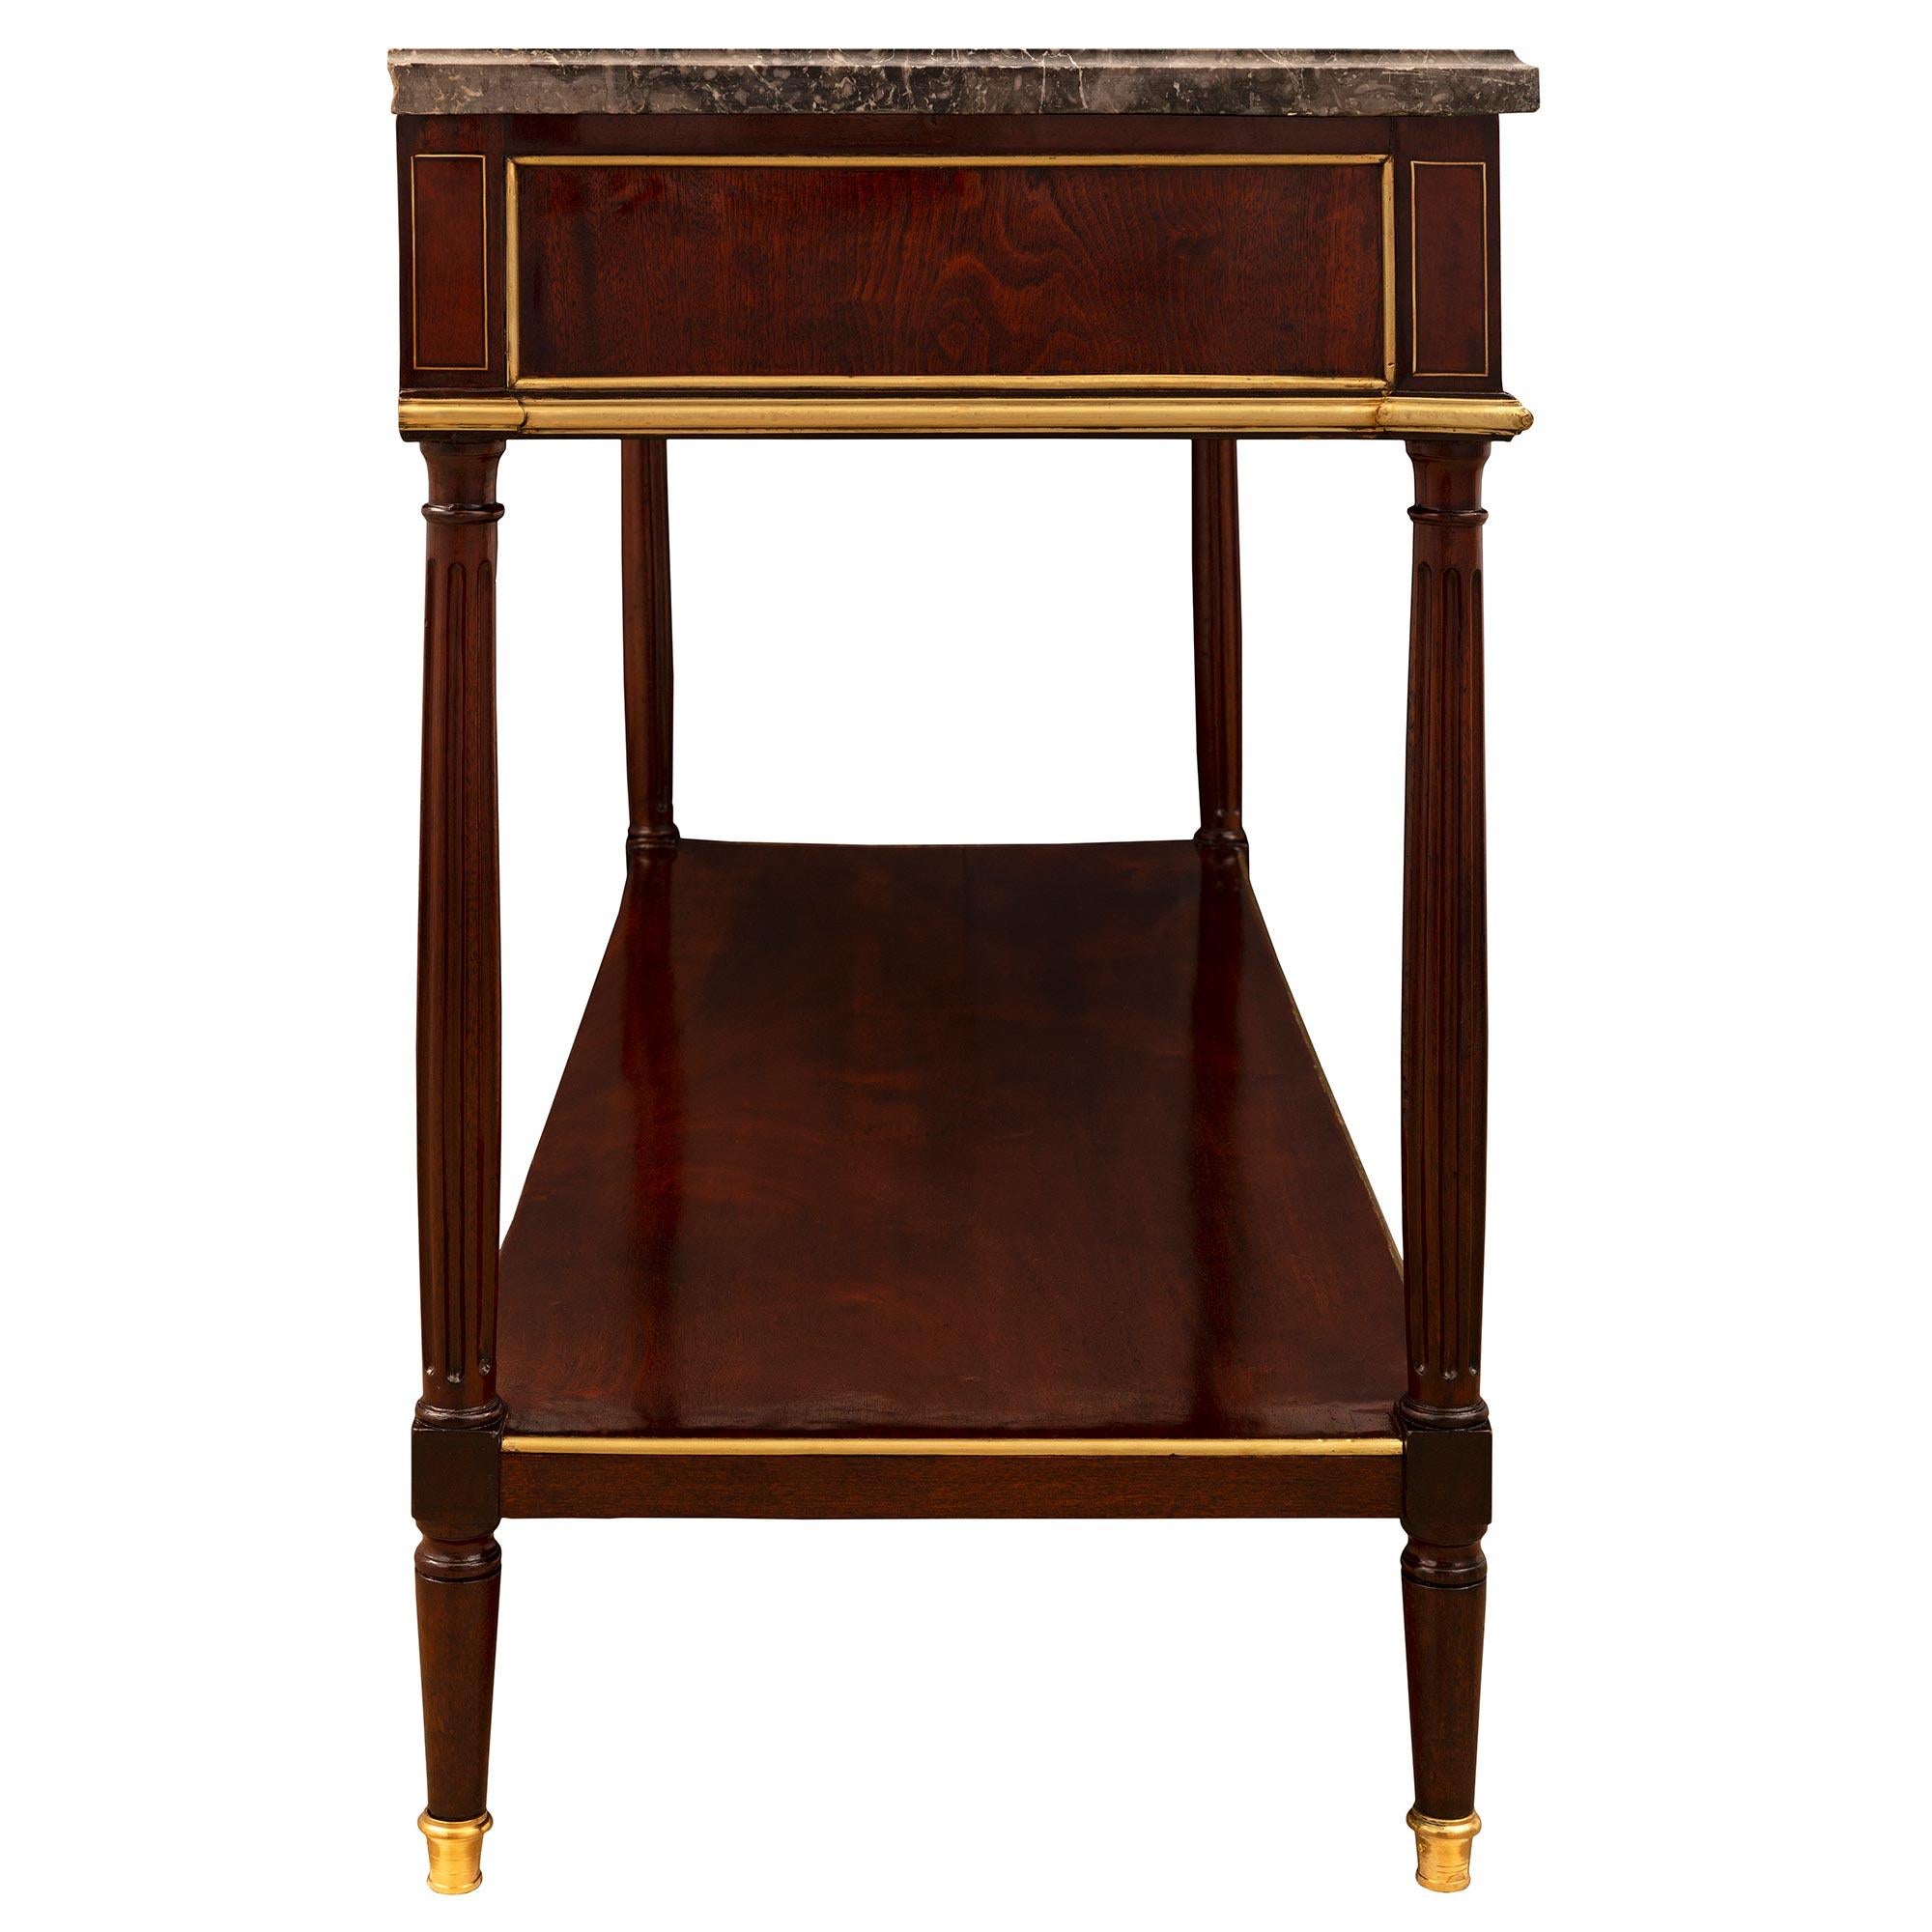 French 18th Century Louis XVI Period Mahogany, Ormolu and Marble Dessert Console For Sale 1